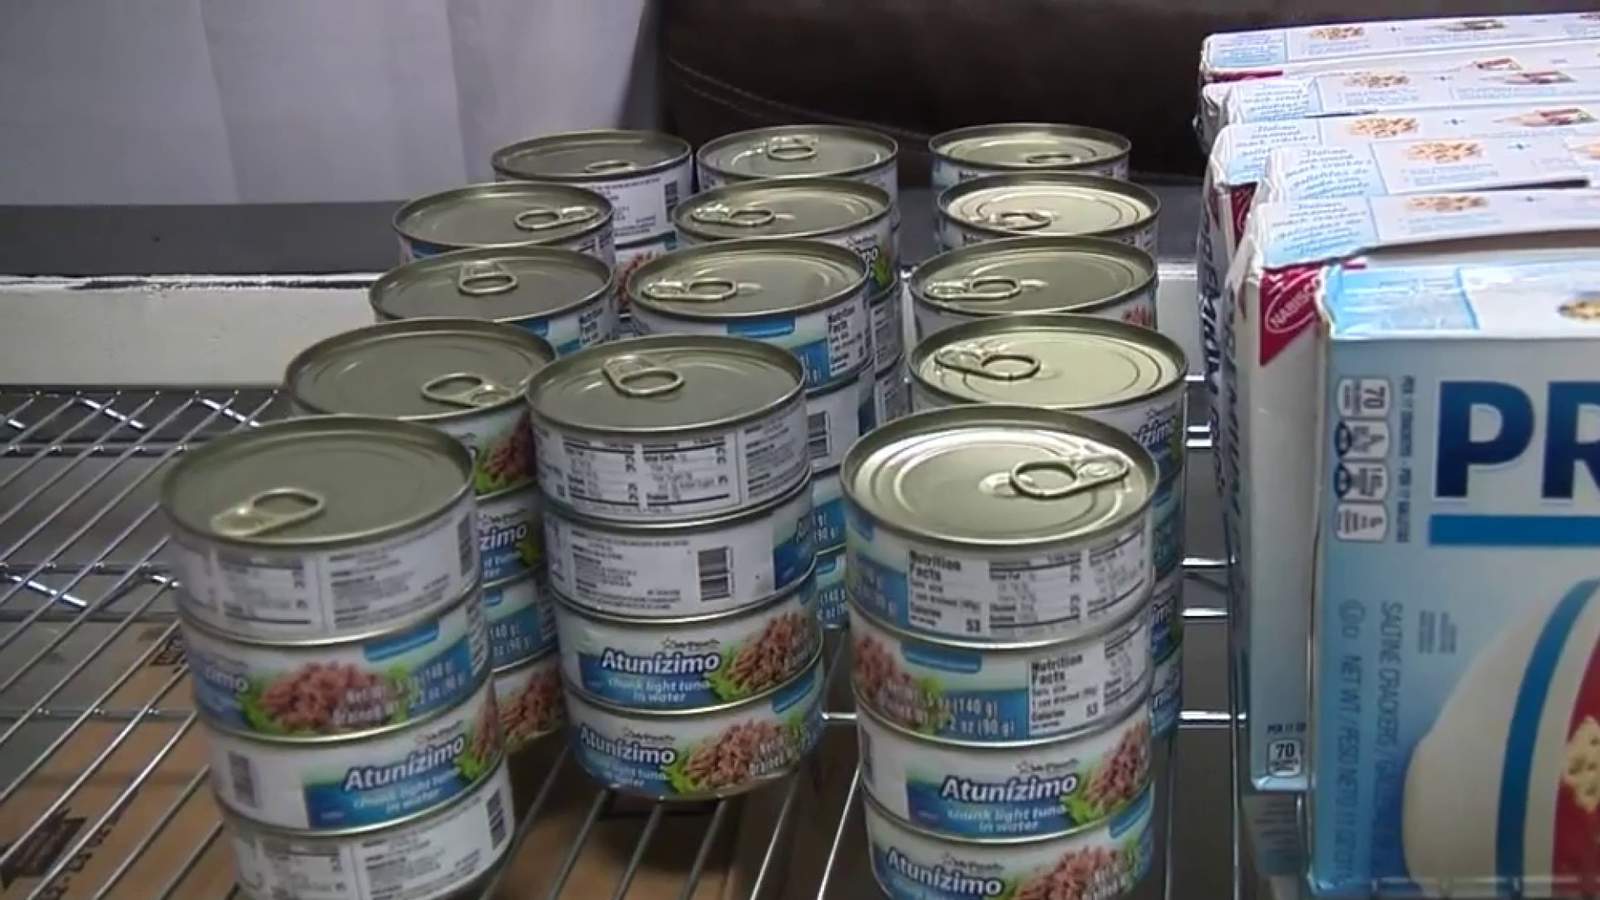 San Antonio Food Bank works to help people during difficult time